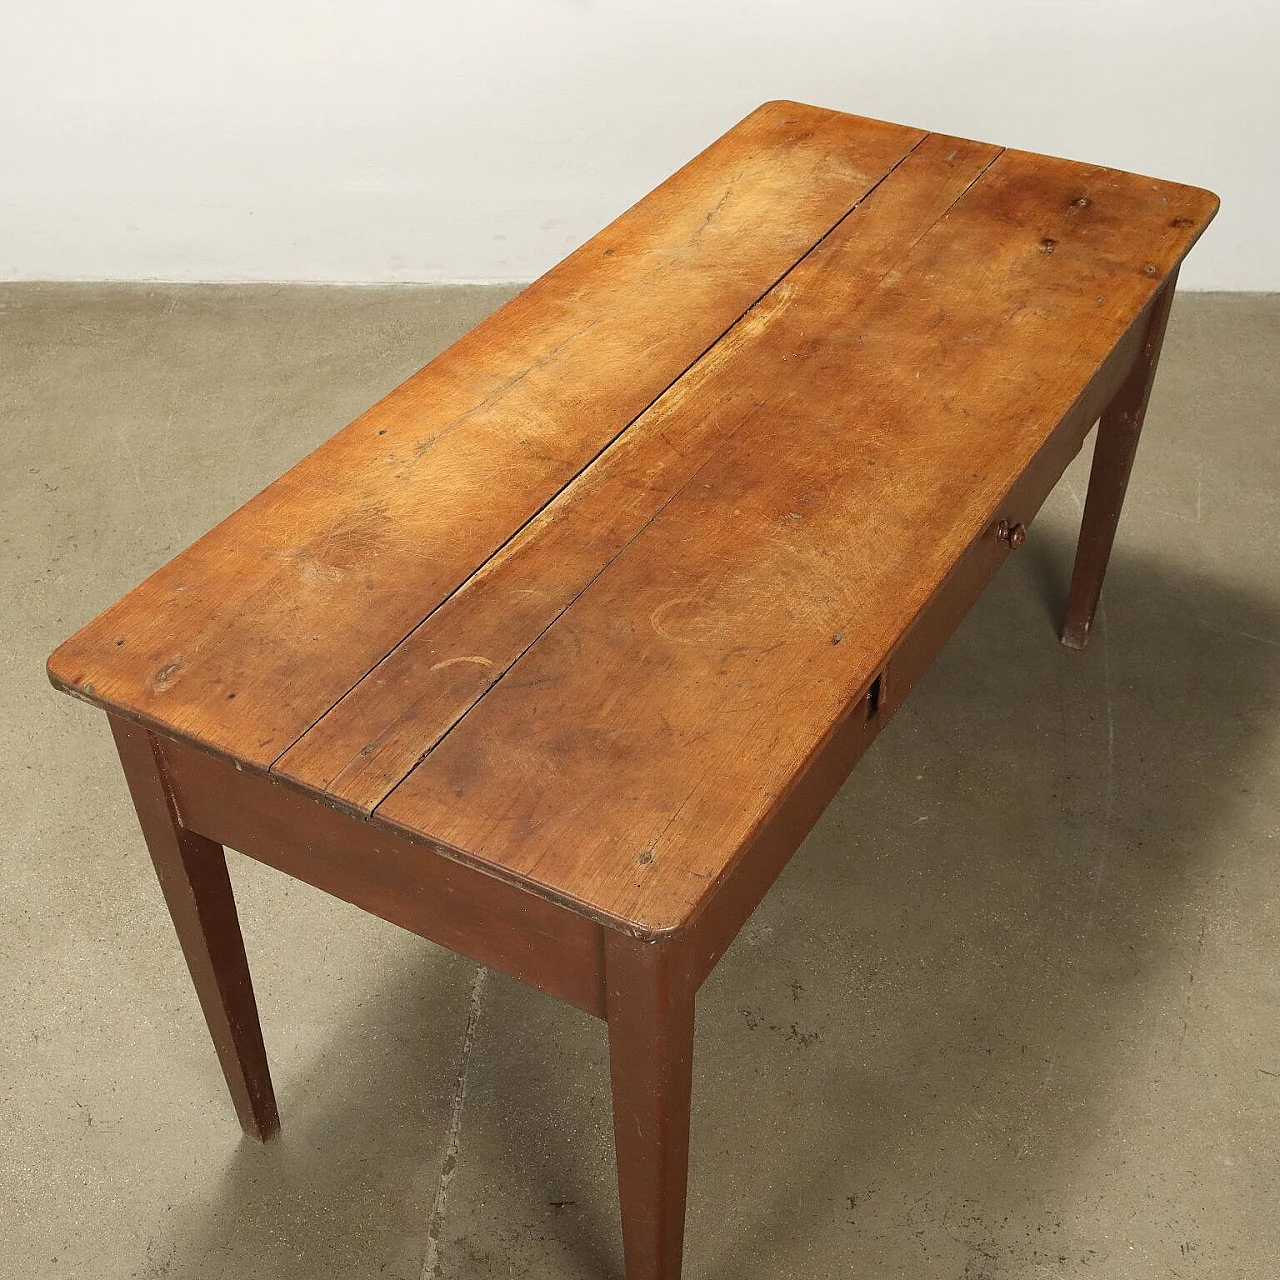 Table with cherry wood top and drawer, late 19th century 7